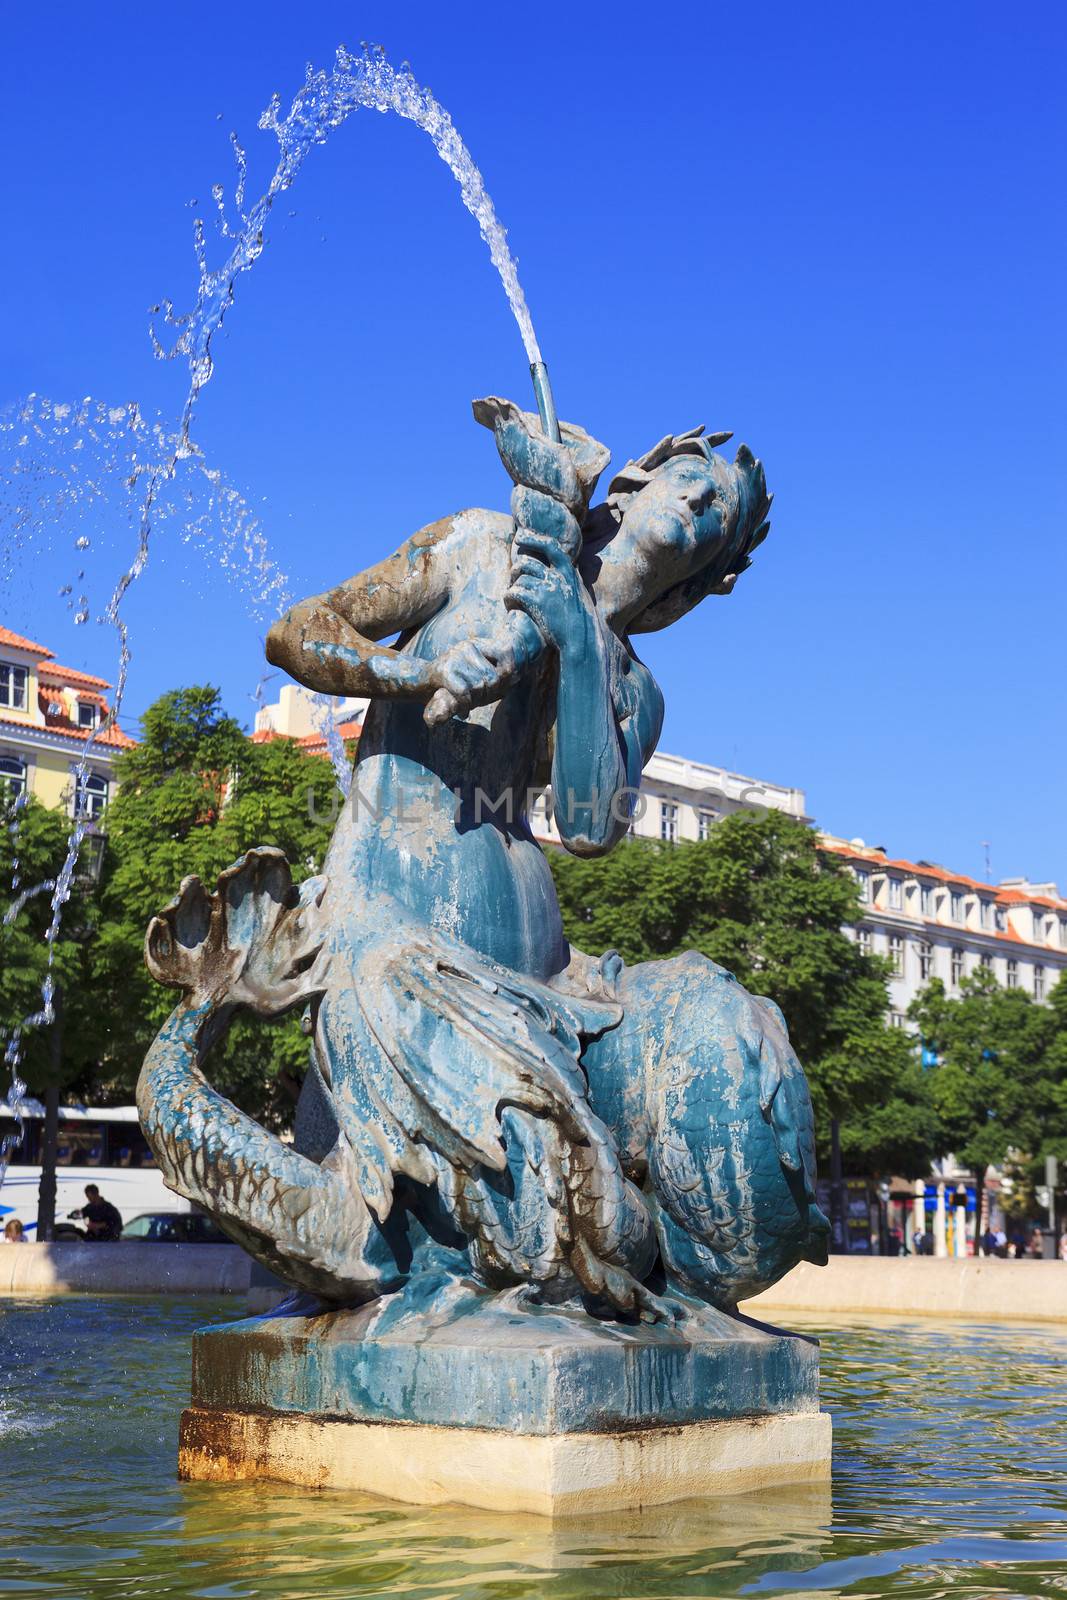 Baroque fountain on rossio square the liveliest placa in Lisbon